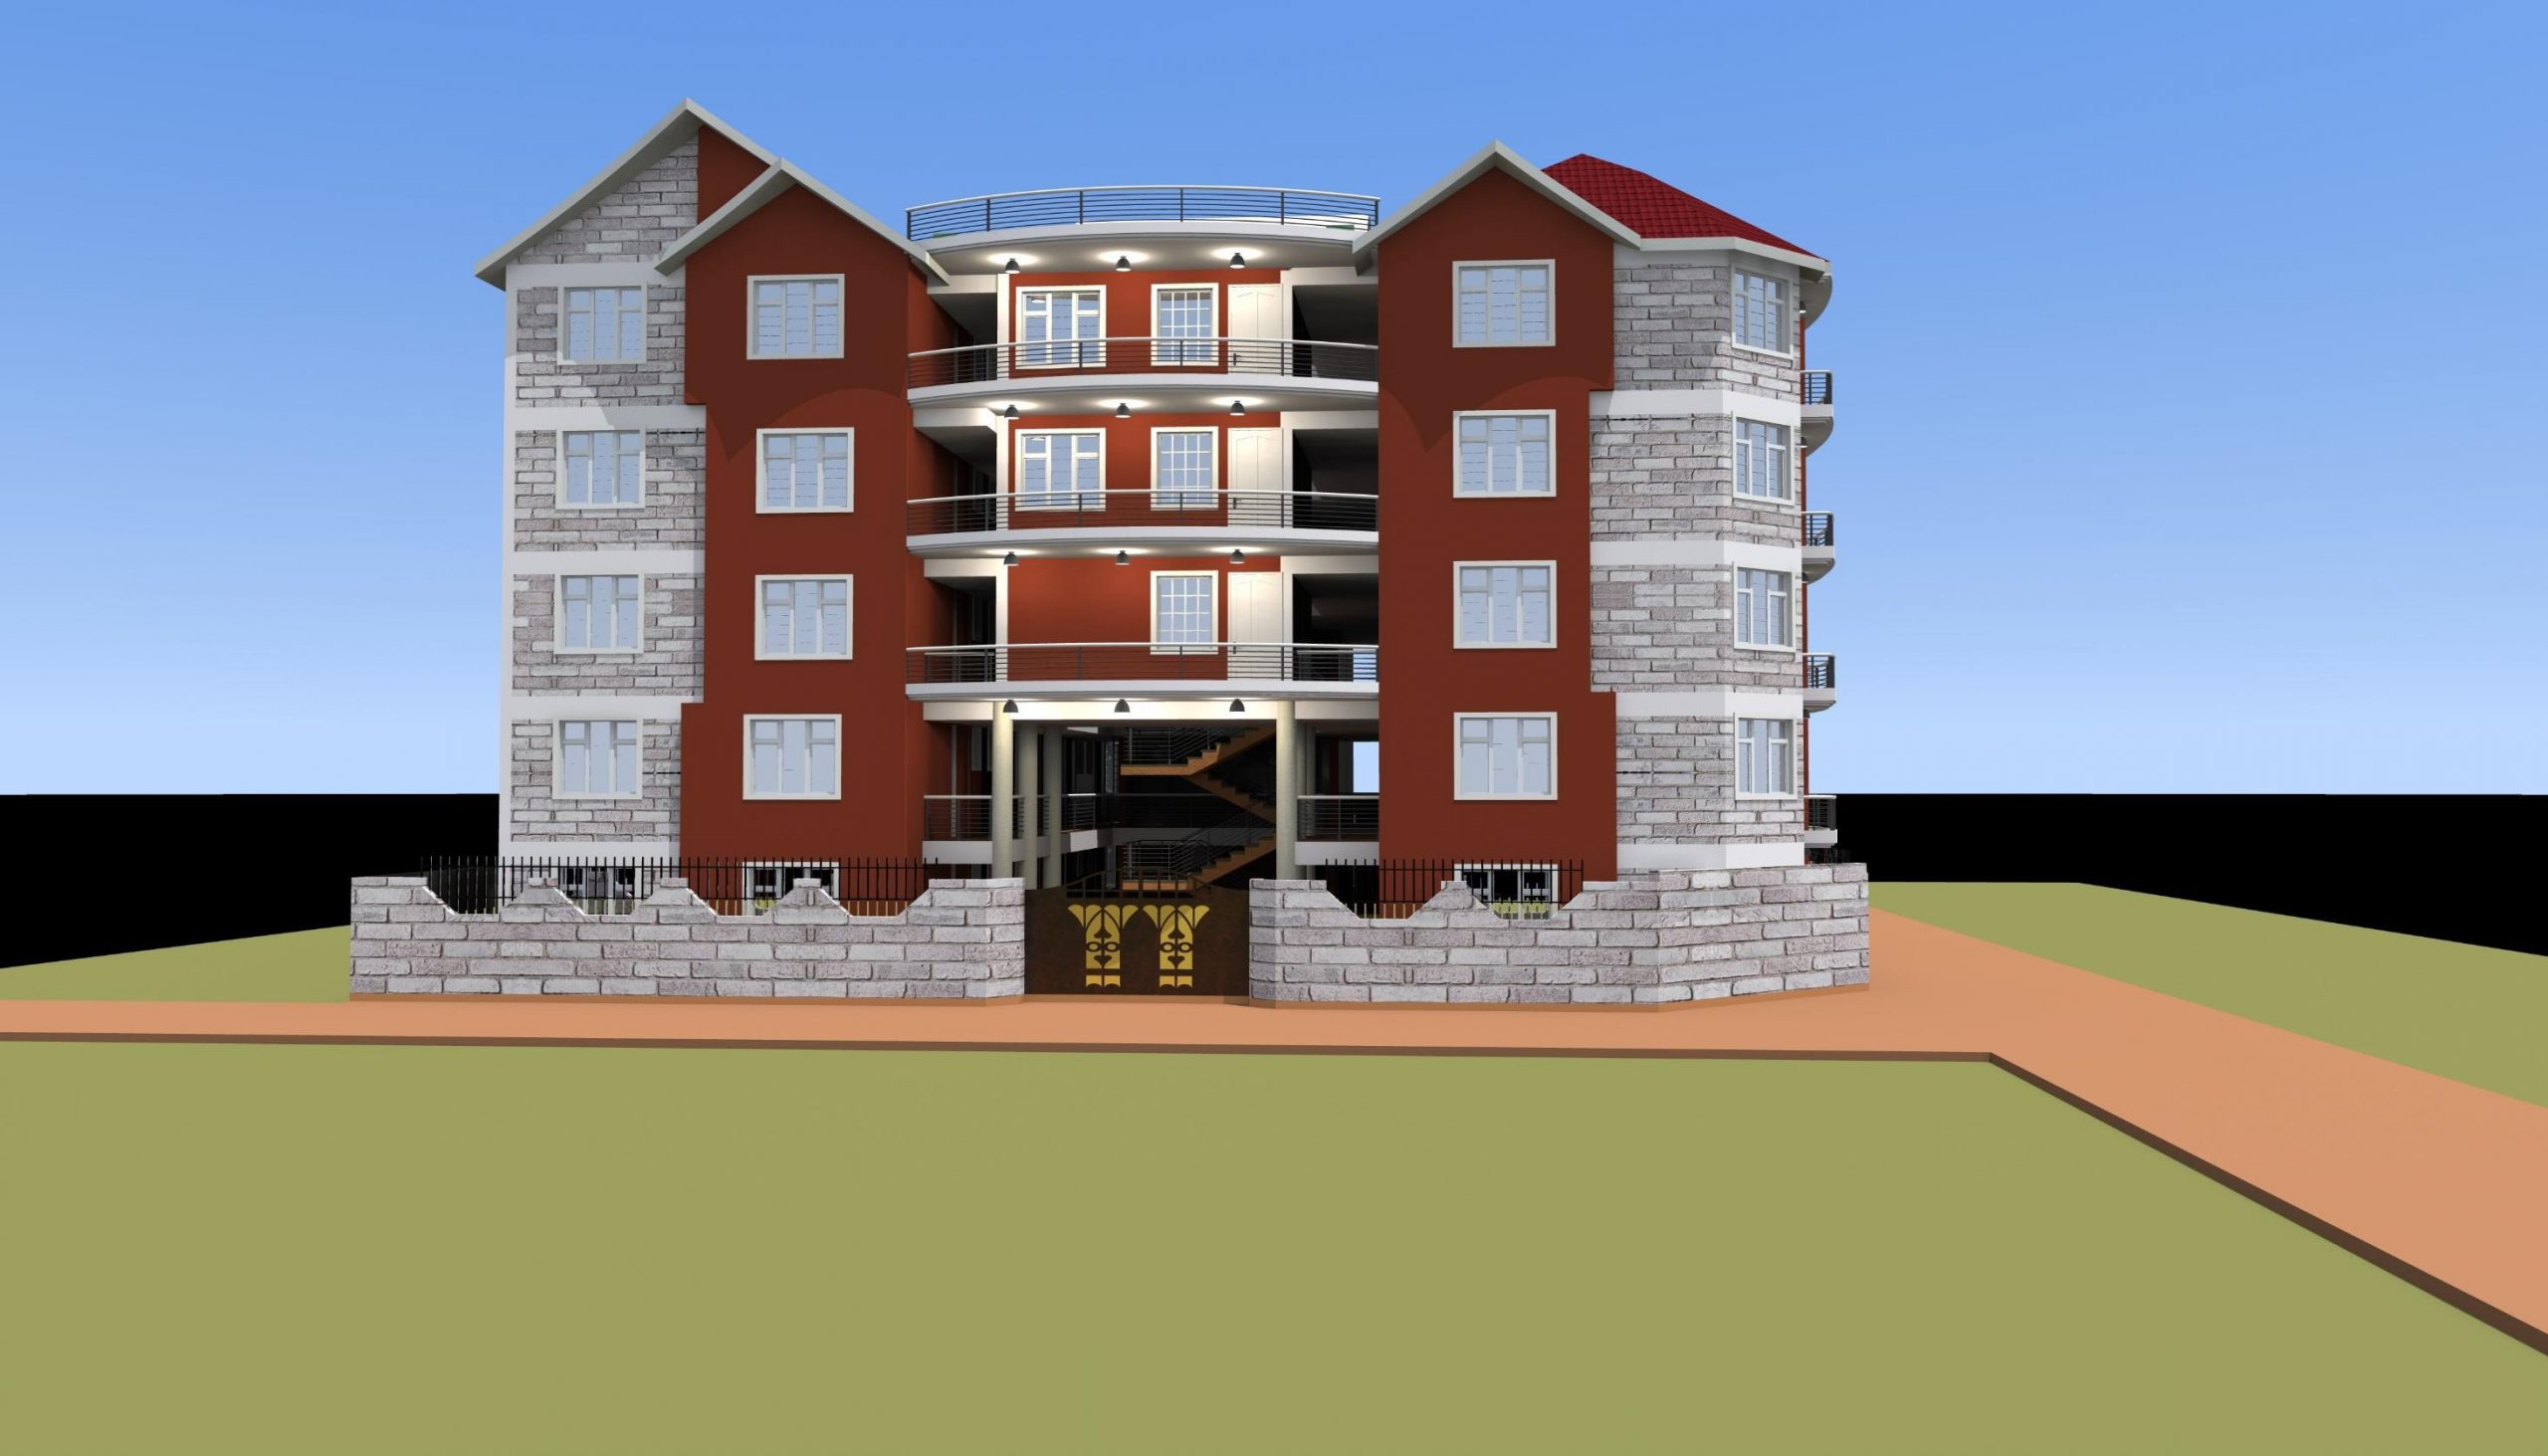 1 bedroom house plans in bungoma,1 bedroom house plans in busia,1 bedroom house plans in eldoret,1 bedroom house plans in homabay,1 bedroom house plans in kakamega,1 bedroom house plans in kenya,1 bedroom house plans in kericho,1 bedroom house plans in kisumu,1 bedroom house plans in migori,1 bedroom house plans in nandi,1 bedroom house plans in siaya,1 bedroom house plans in vihiga,2 bedroom bungalow house plans in bungoma,2 bedroom bungalow house plans in busia,2 bedroom bungalow house plans in eldoret,2 bedroom bungalow house plans in homabay,2 bedroom bungalow house plans in kakamega,2 bedroom bungalow house plans in kenya,2 bedroom bungalow house plans in kericho,2 bedroom bungalow house plans in kisumu